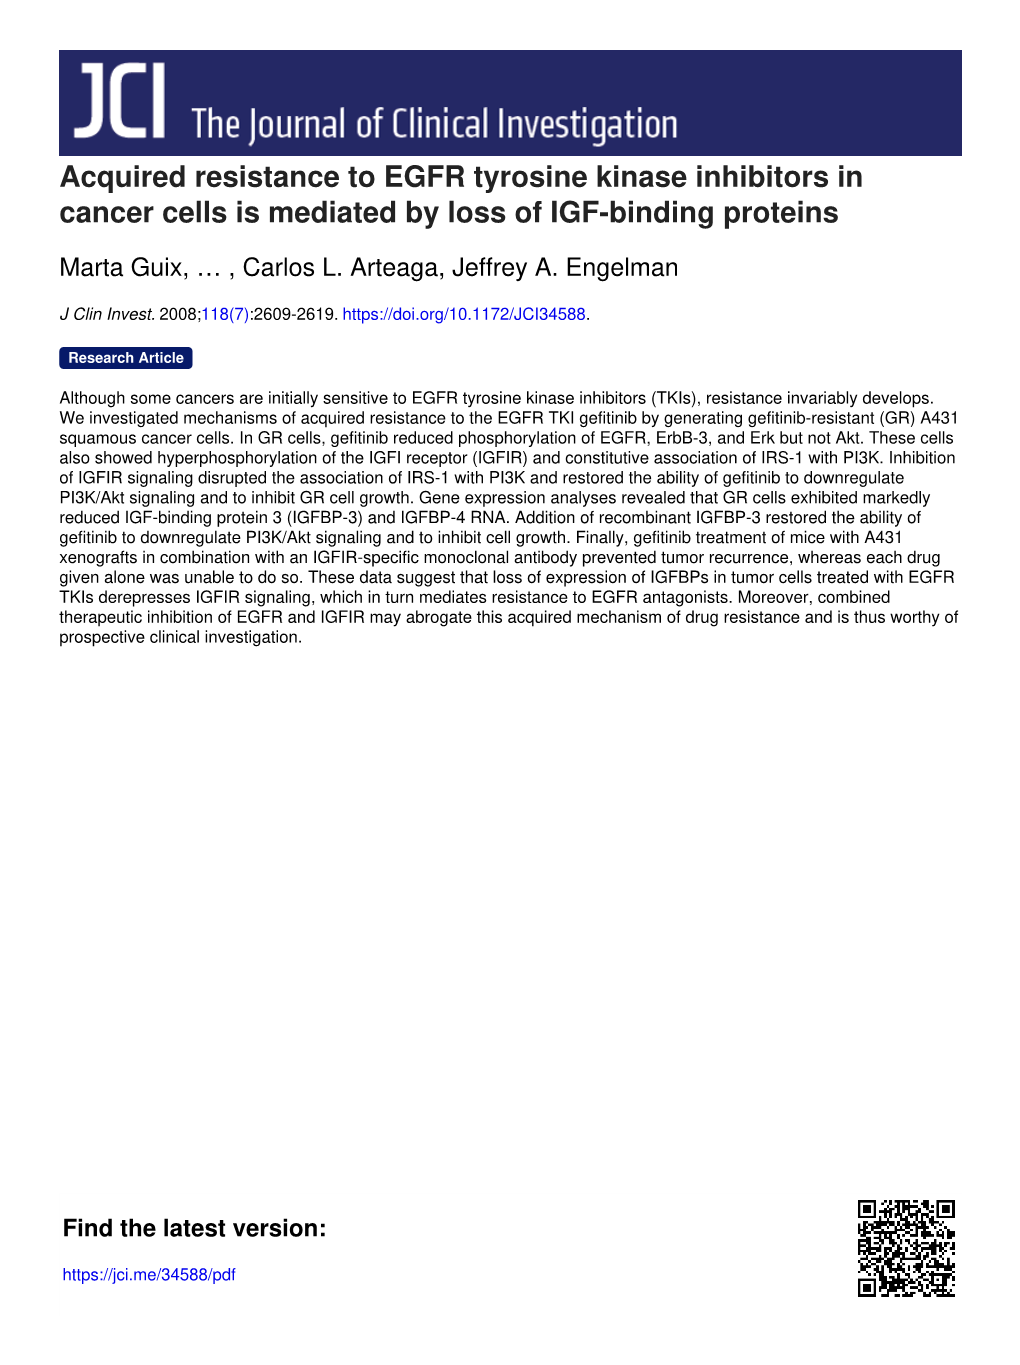 Acquired Resistance to EGFR Tyrosine Kinase Inhibitors in Cancer Cells Is Mediated by Loss of IGF-Binding Proteins